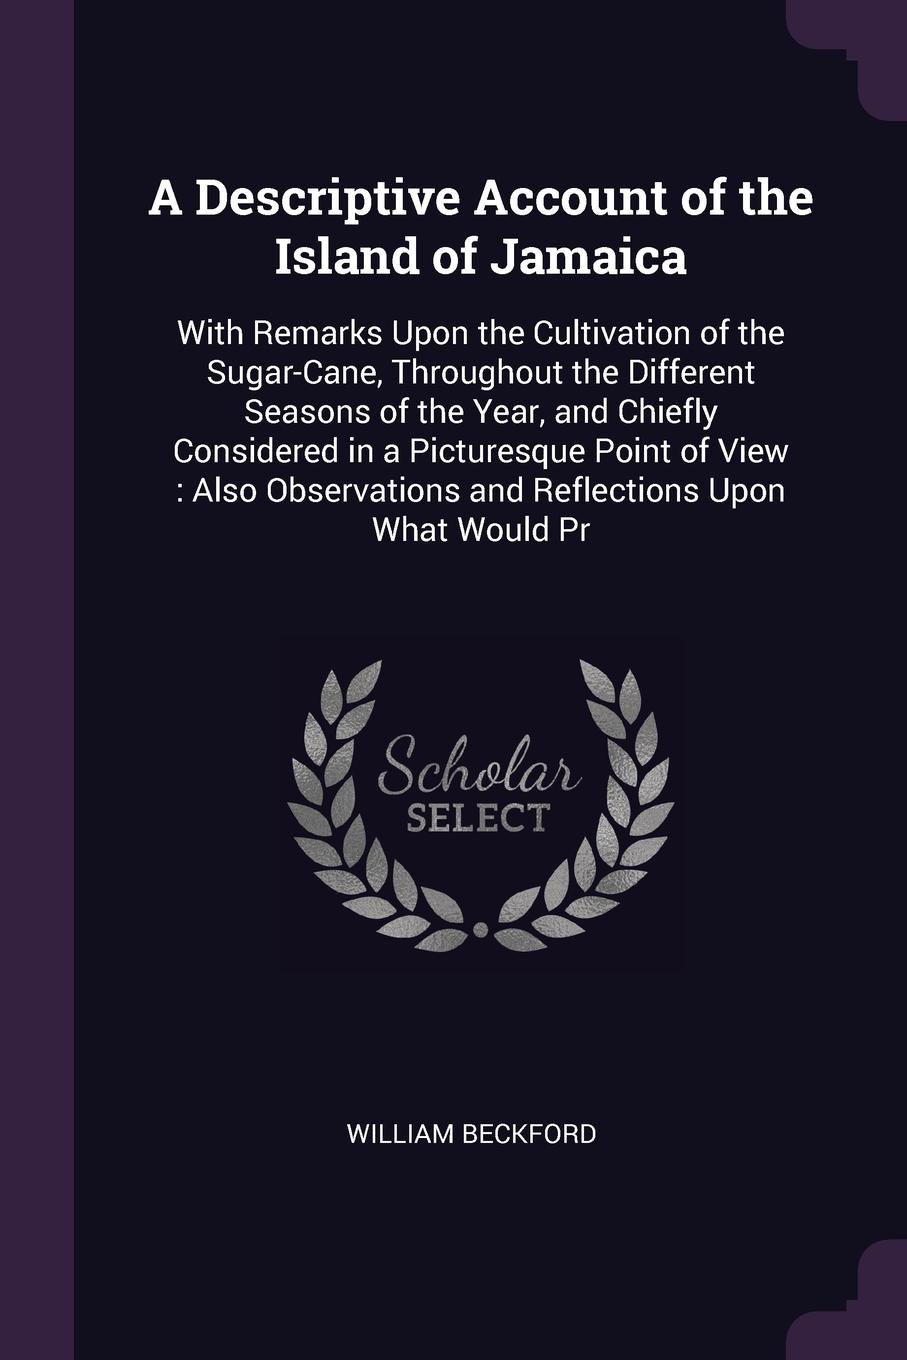 A Descriptive Account of the Island of Jamaica. With Remarks Upon the Cultivation of the Sugar-Cane, Throughout the Different Seasons of the Year, and Chiefly Considered in a Picturesque Point of View : Also Observations and Reflections Upon What ...